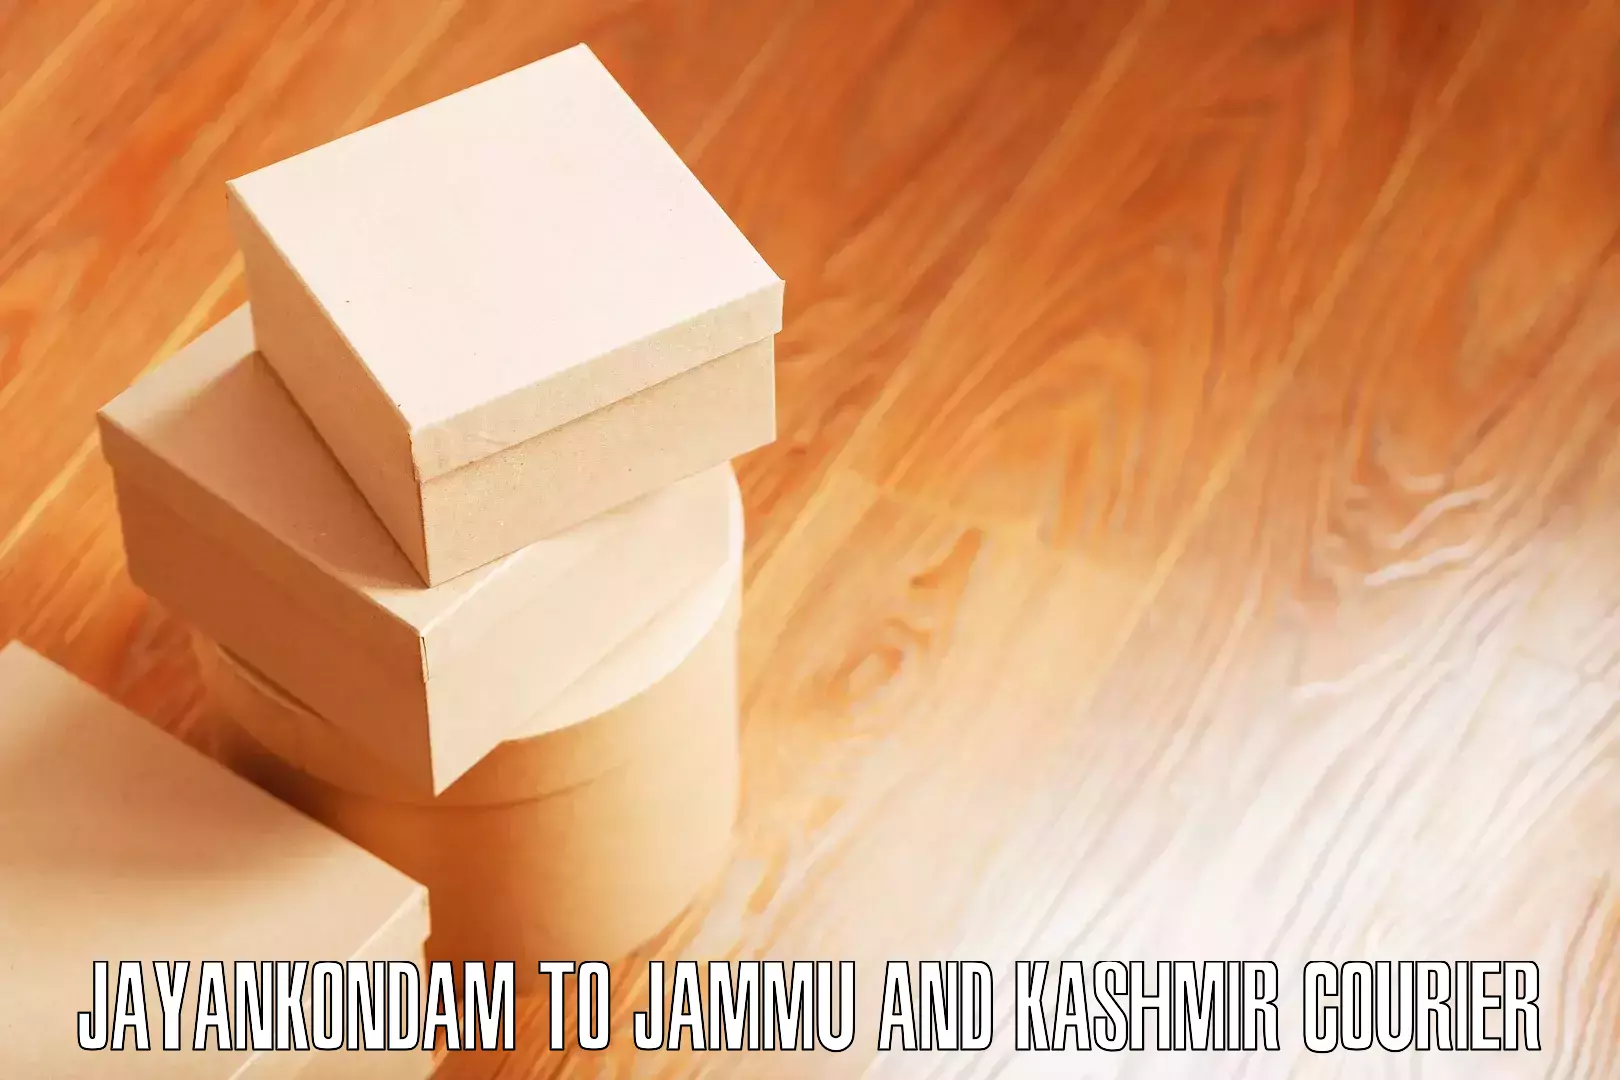 Professional packing services in Jayankondam to Jammu and Kashmir